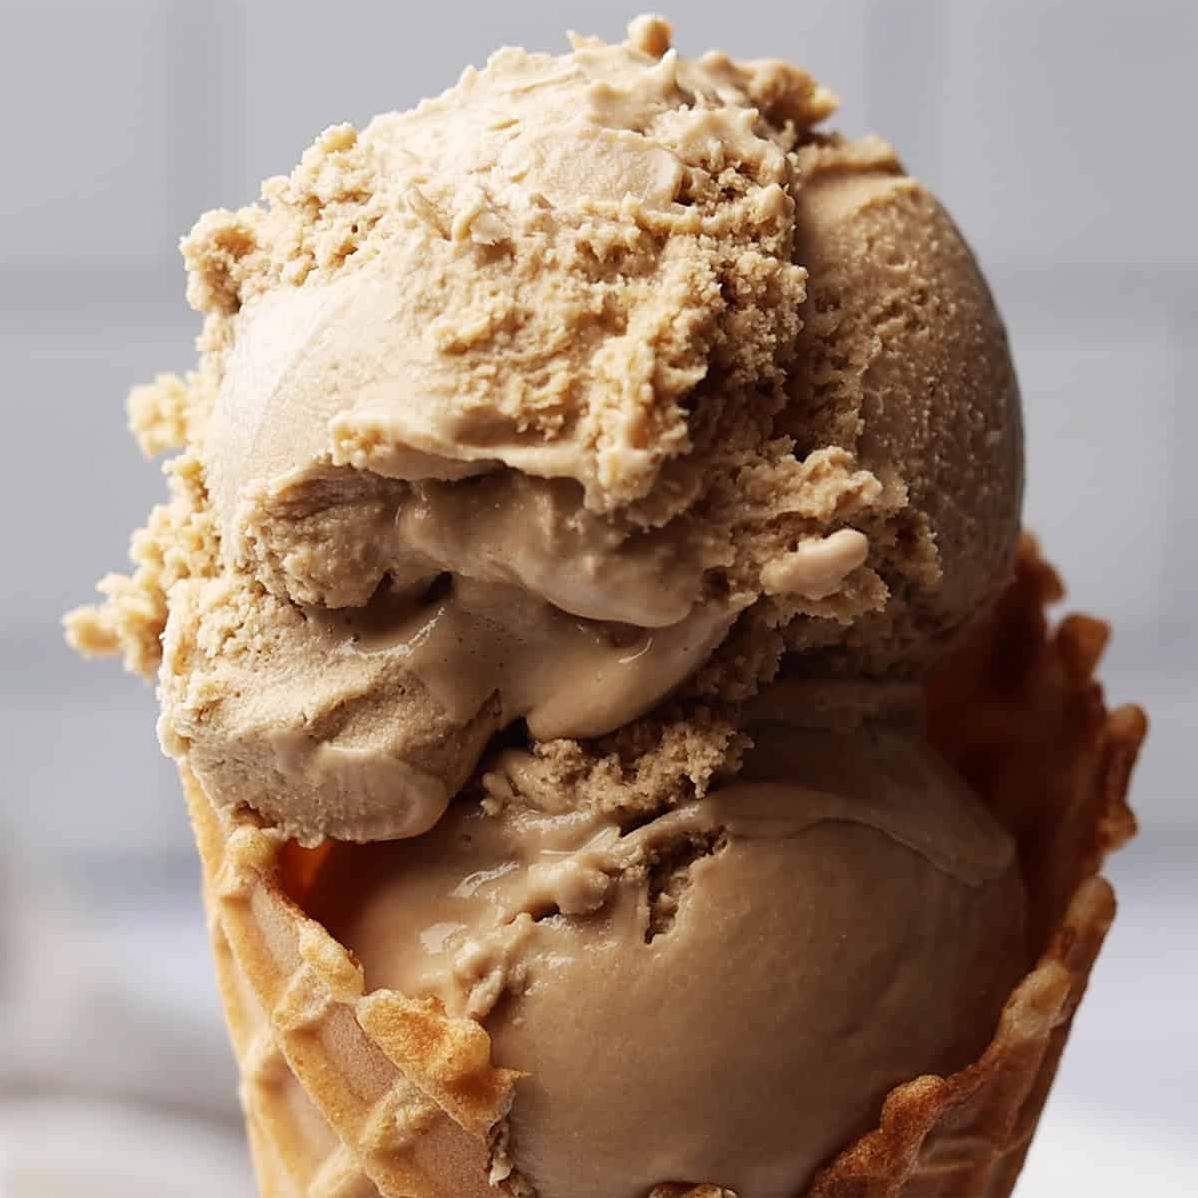  Indulge in the rich and bold flavor of homemade coffee ice cream.